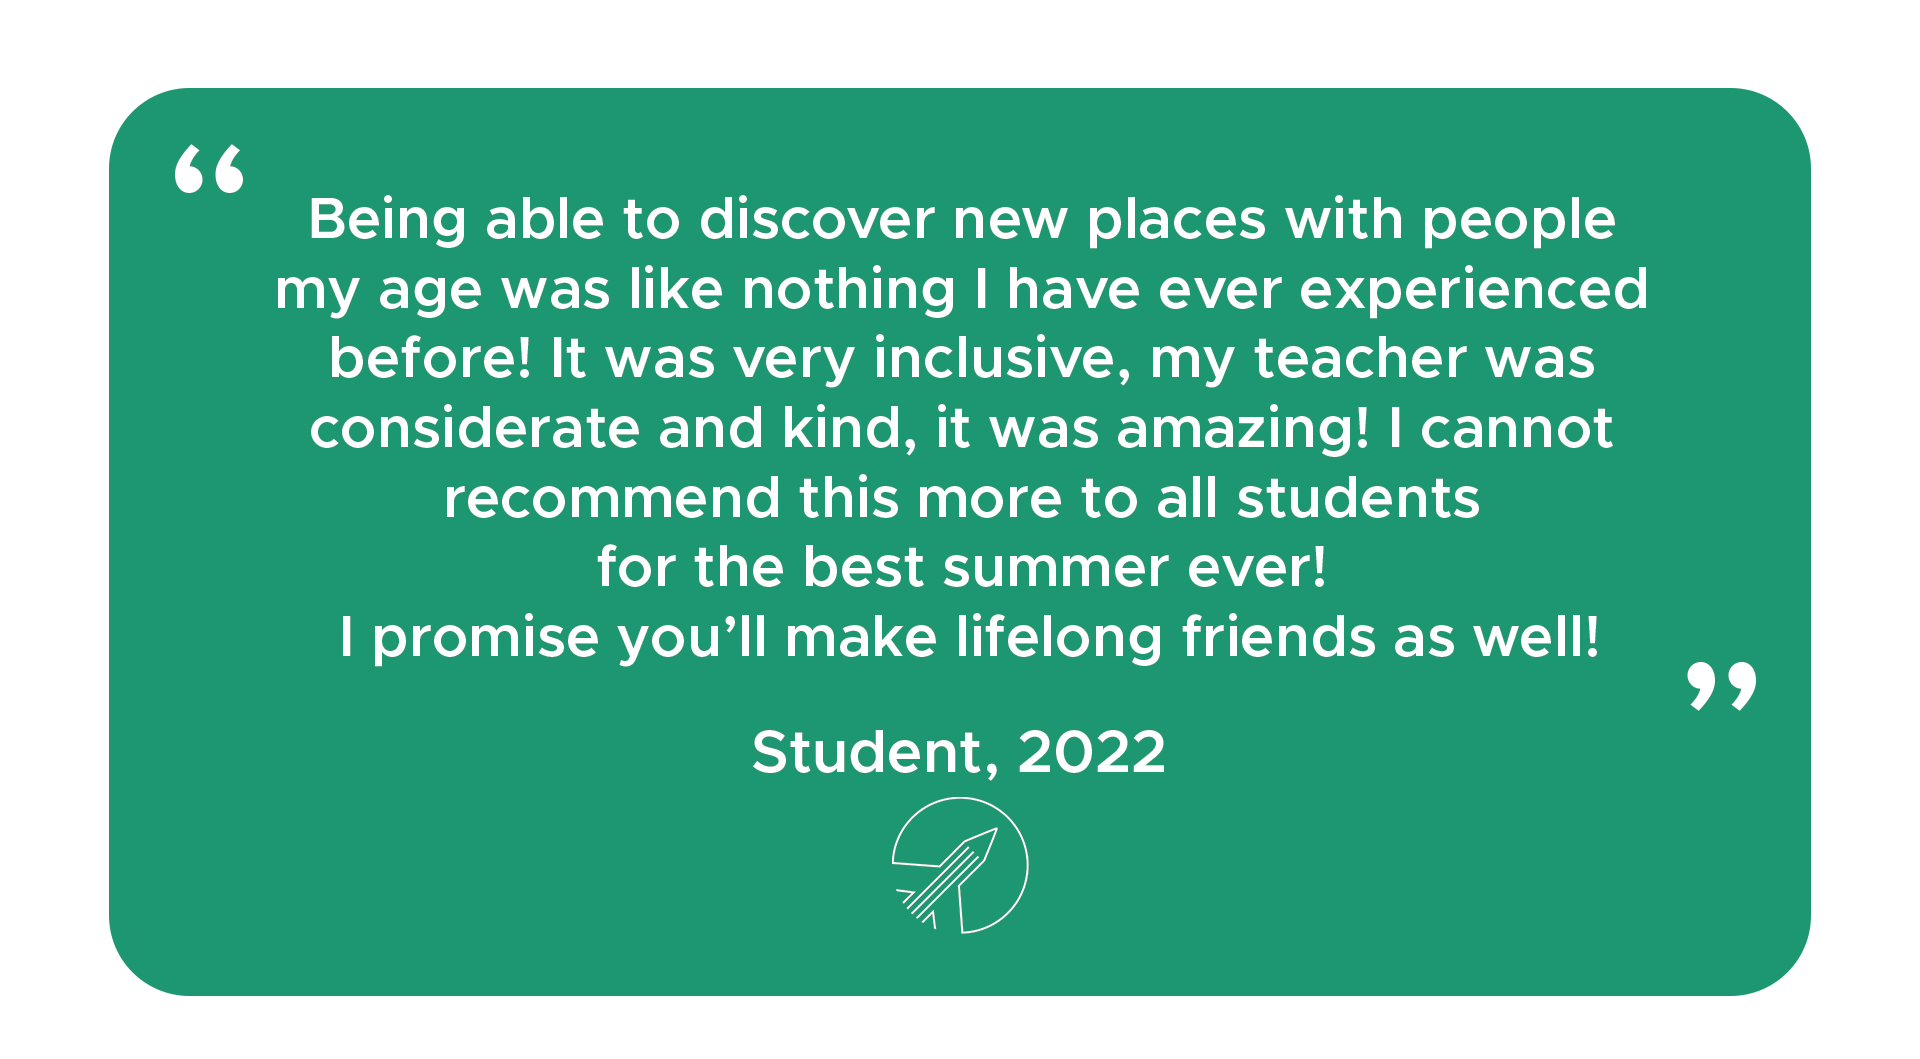 "Being able to discover new places with people my age was like nothing I have ever experienced before! It was very inclusive, my teacher was considerate and kind, it was amazing! I cannot recommend this more to all students for the best summer ever! I promise you’ll make lifelong friends as well!" - Student, 2022